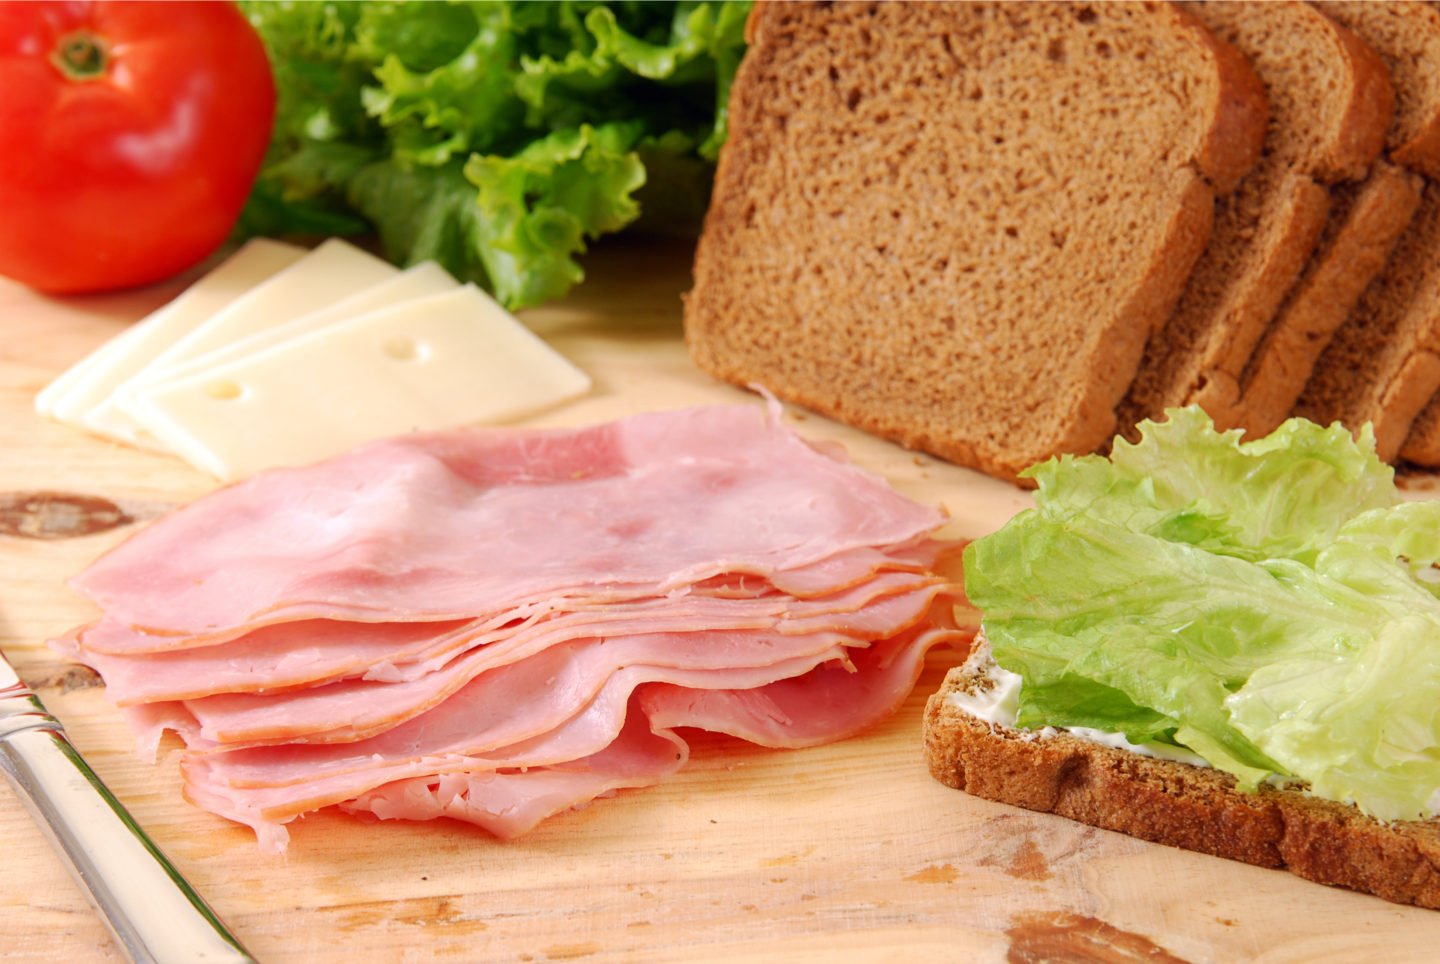 slices of deli ham being made into sandwich